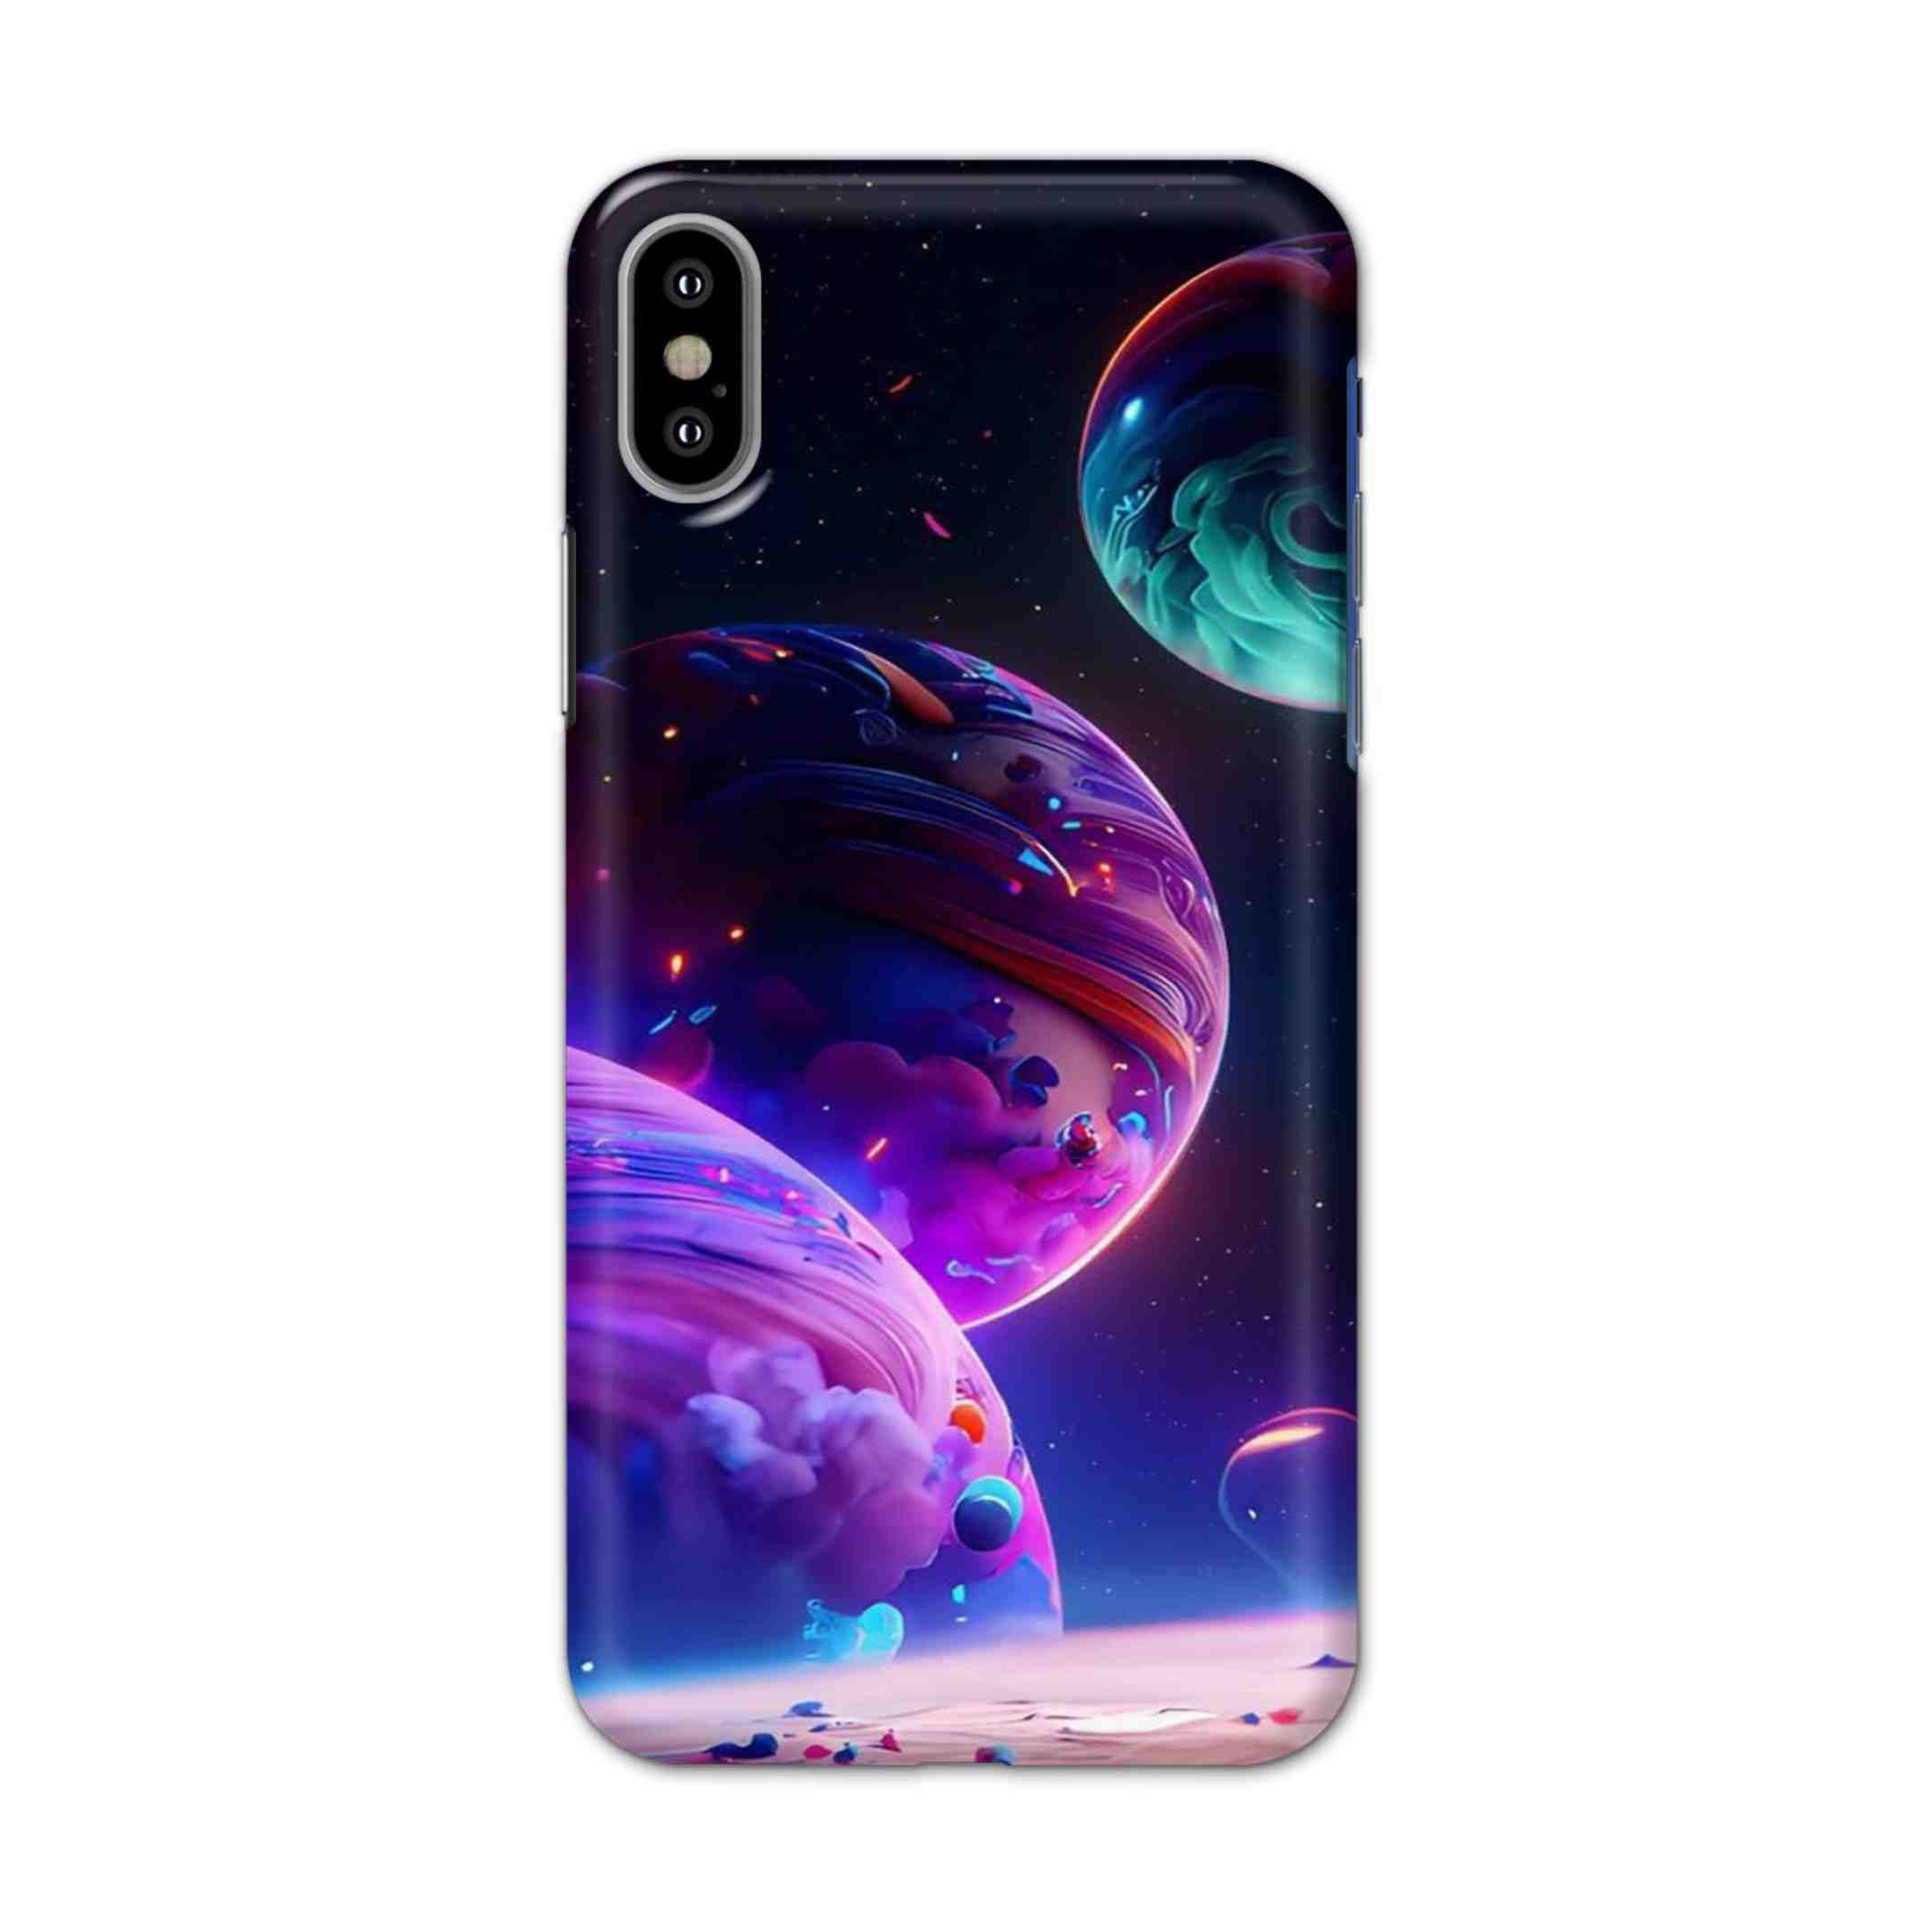 Buy 3 Earth Hard Back Mobile Phone Case/Cover For iPhone X Online